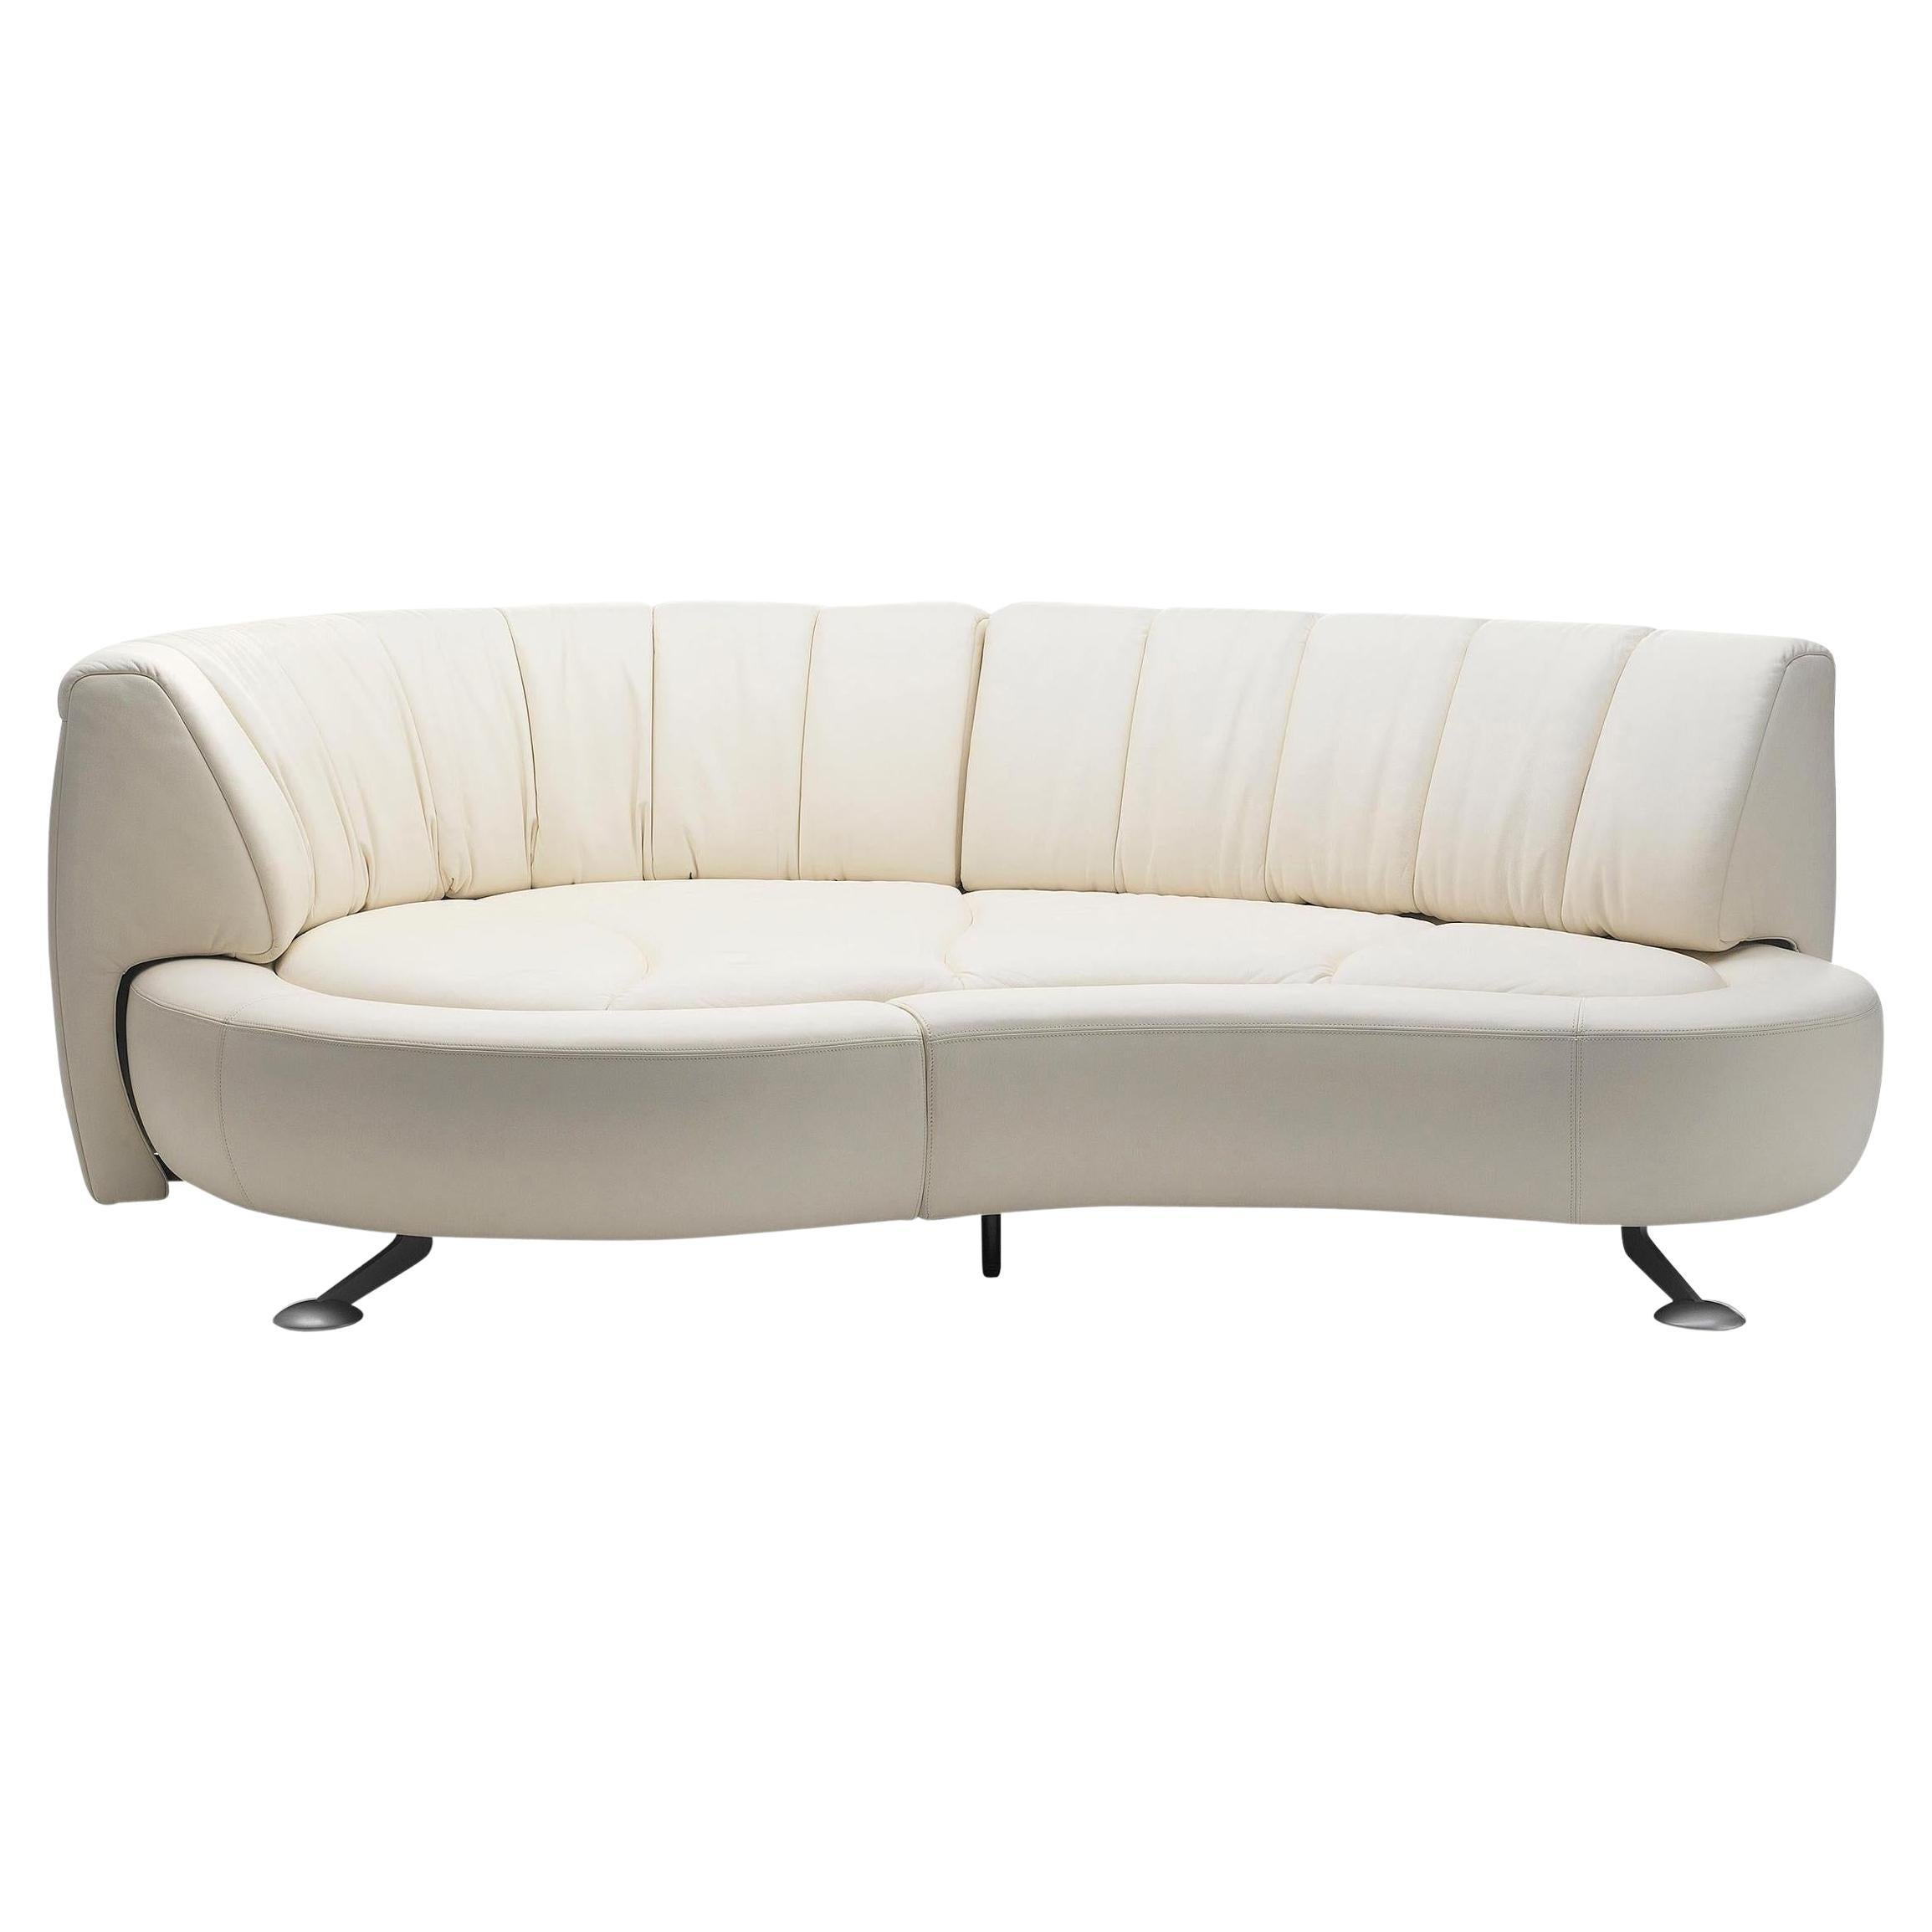 De Sede DS-164 Right Sofa Bed in Off White Upholstery by Hugo de Ruiter